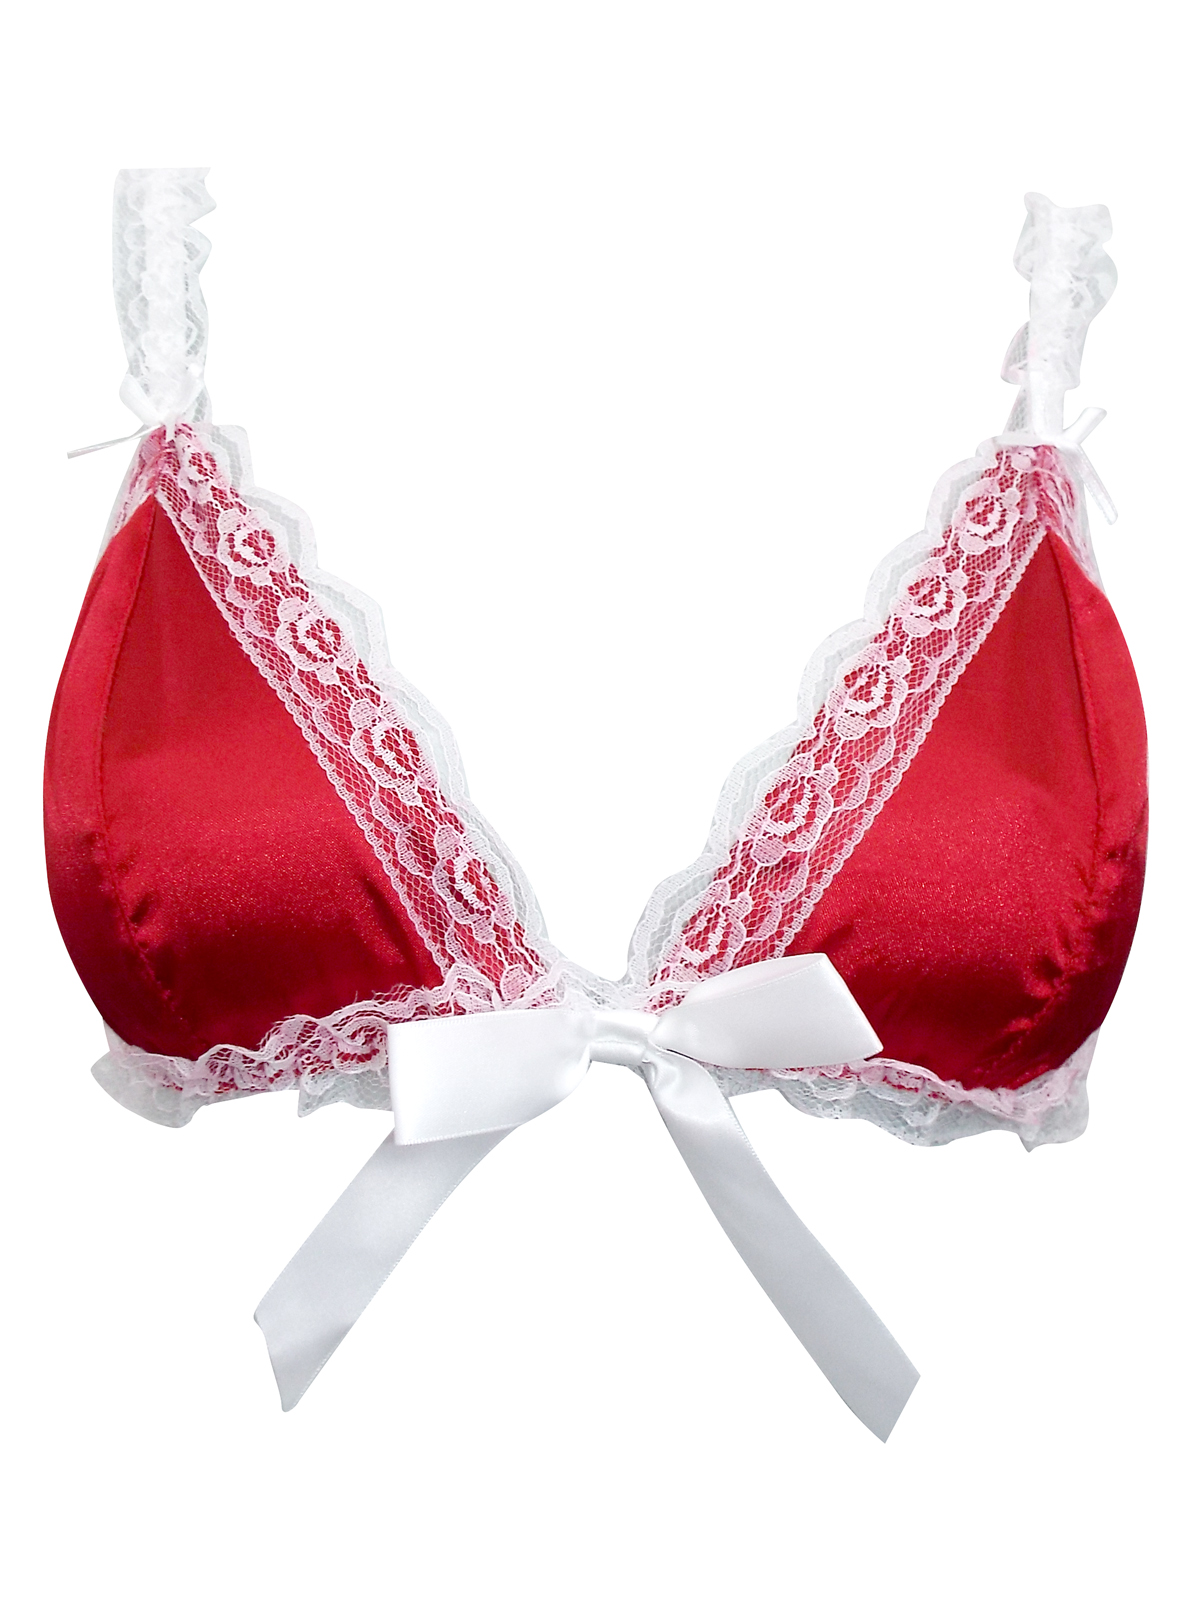 *FREE POST* Ann Summers Fianna Red Crotchless Thong Sz Small 8-10 